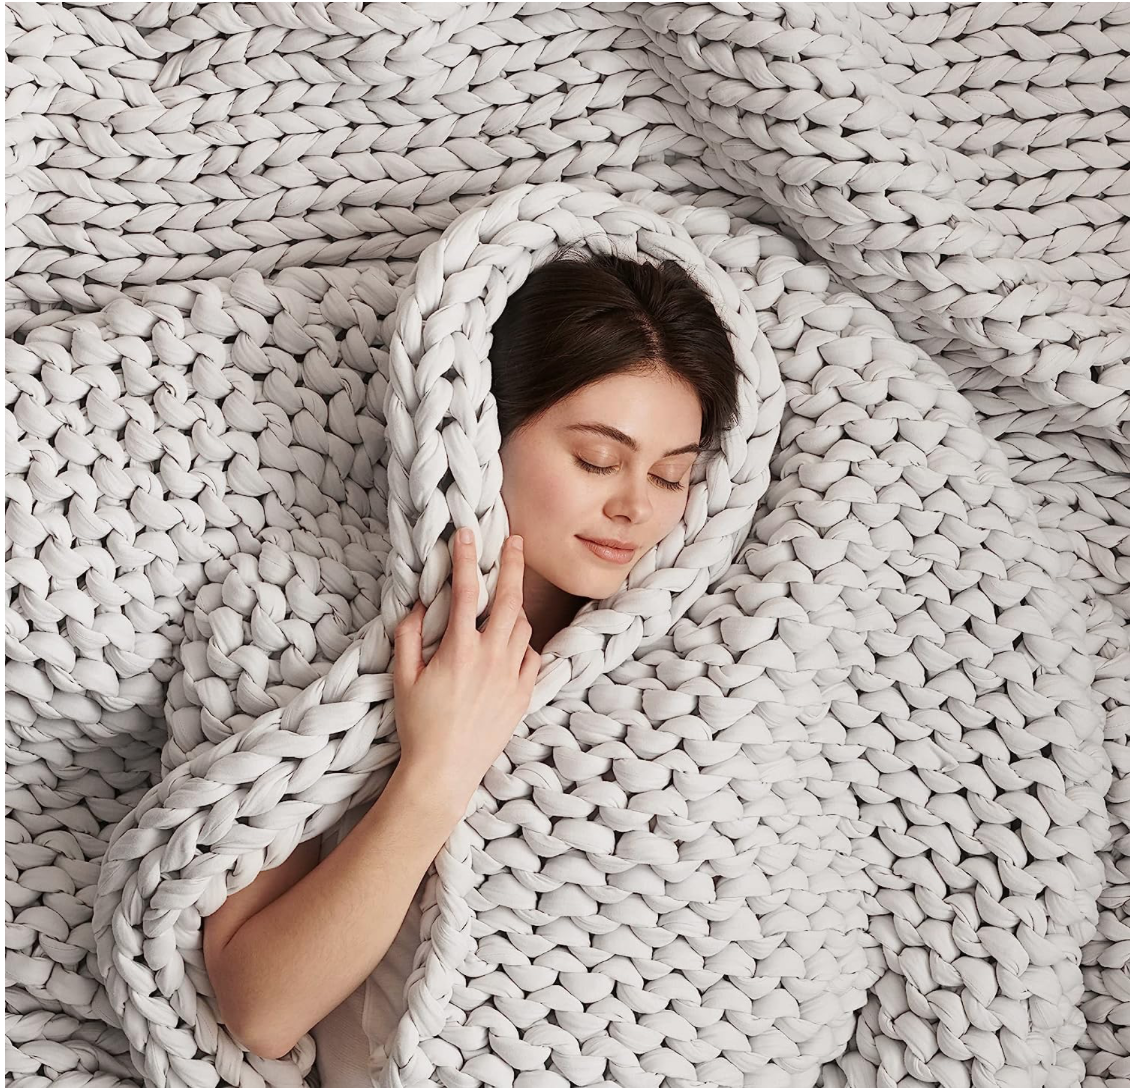 Bearaby Napper Organic Hand-Knit Weighted Blanket for Adults - Chunky Knit Blanket (Copy)